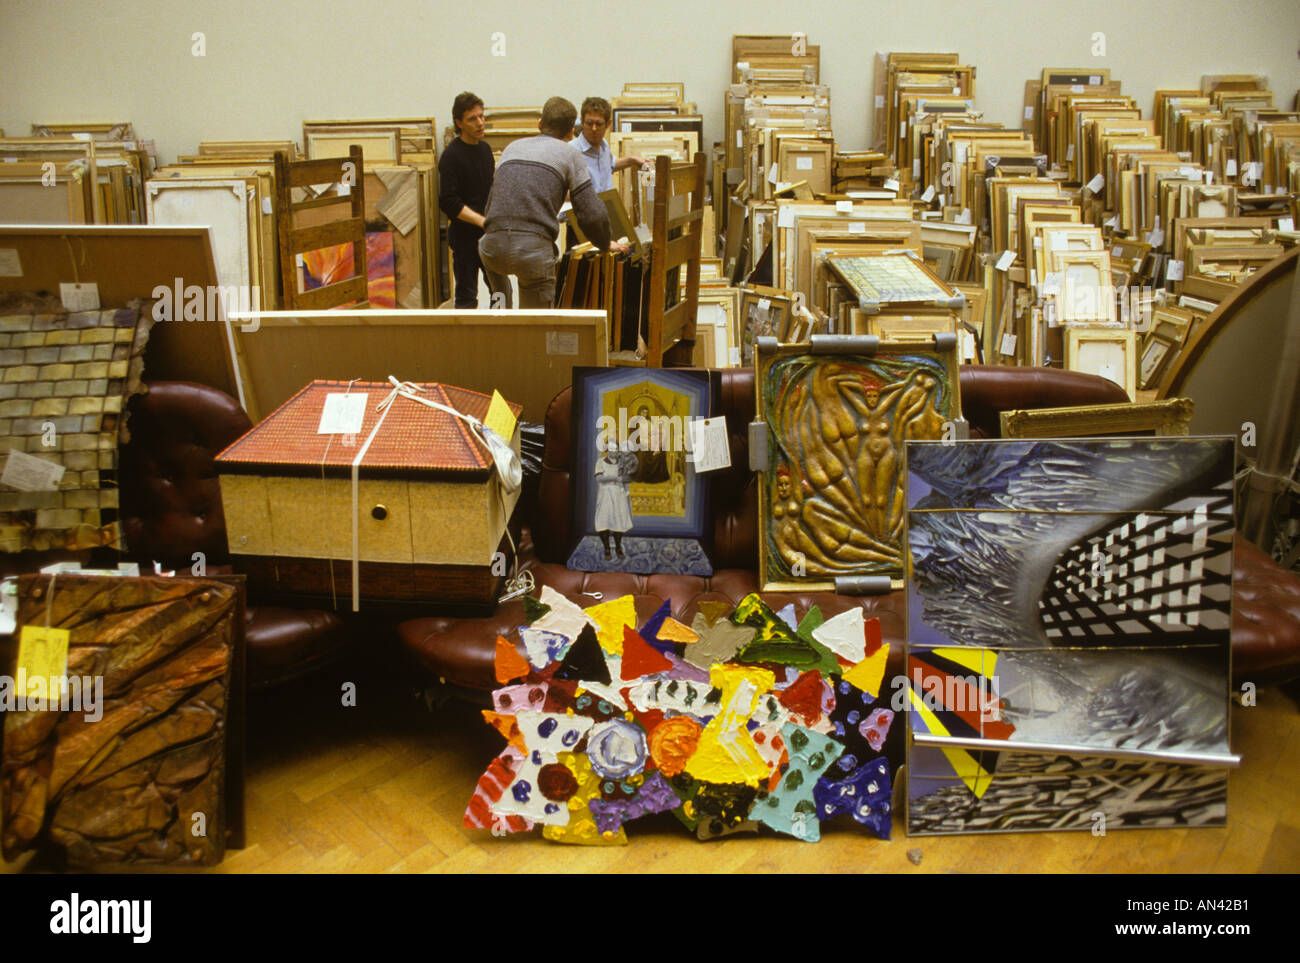 1980s Royal Academy Summer Exhibition Burlington House British amateur professional art show work stacked up to be selected from London UK HOMER SYKES Stock Photo